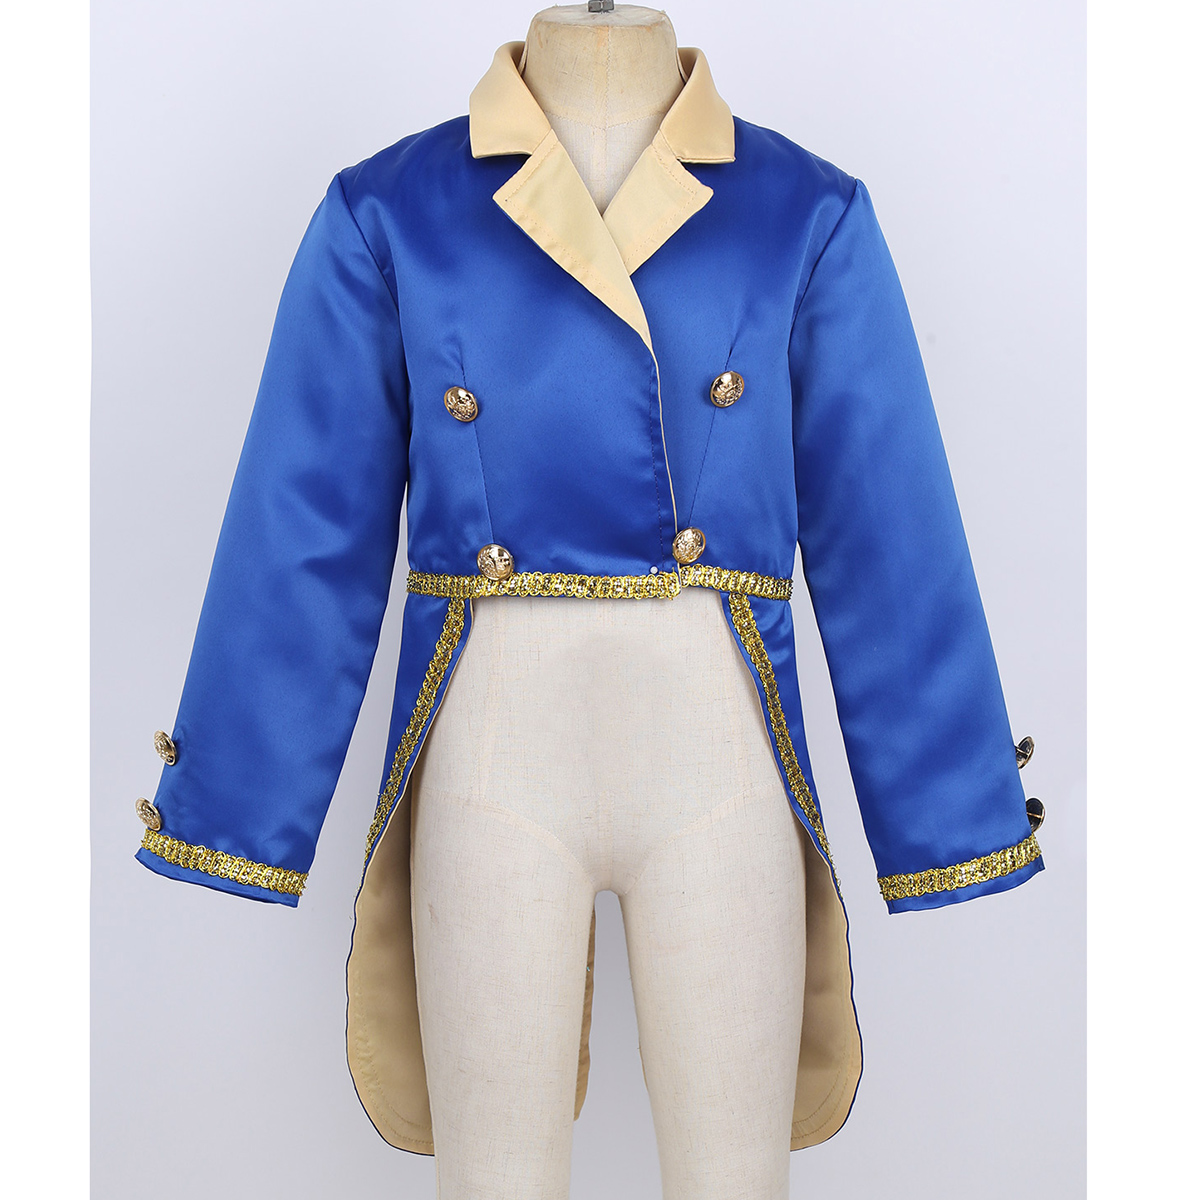 Baby Kids Boys Prince Coat Costume Turn-Down Collar Tuxedo Jacket Child Toddlers Halloween Cosplay Birthday Theme Party Tailcoat